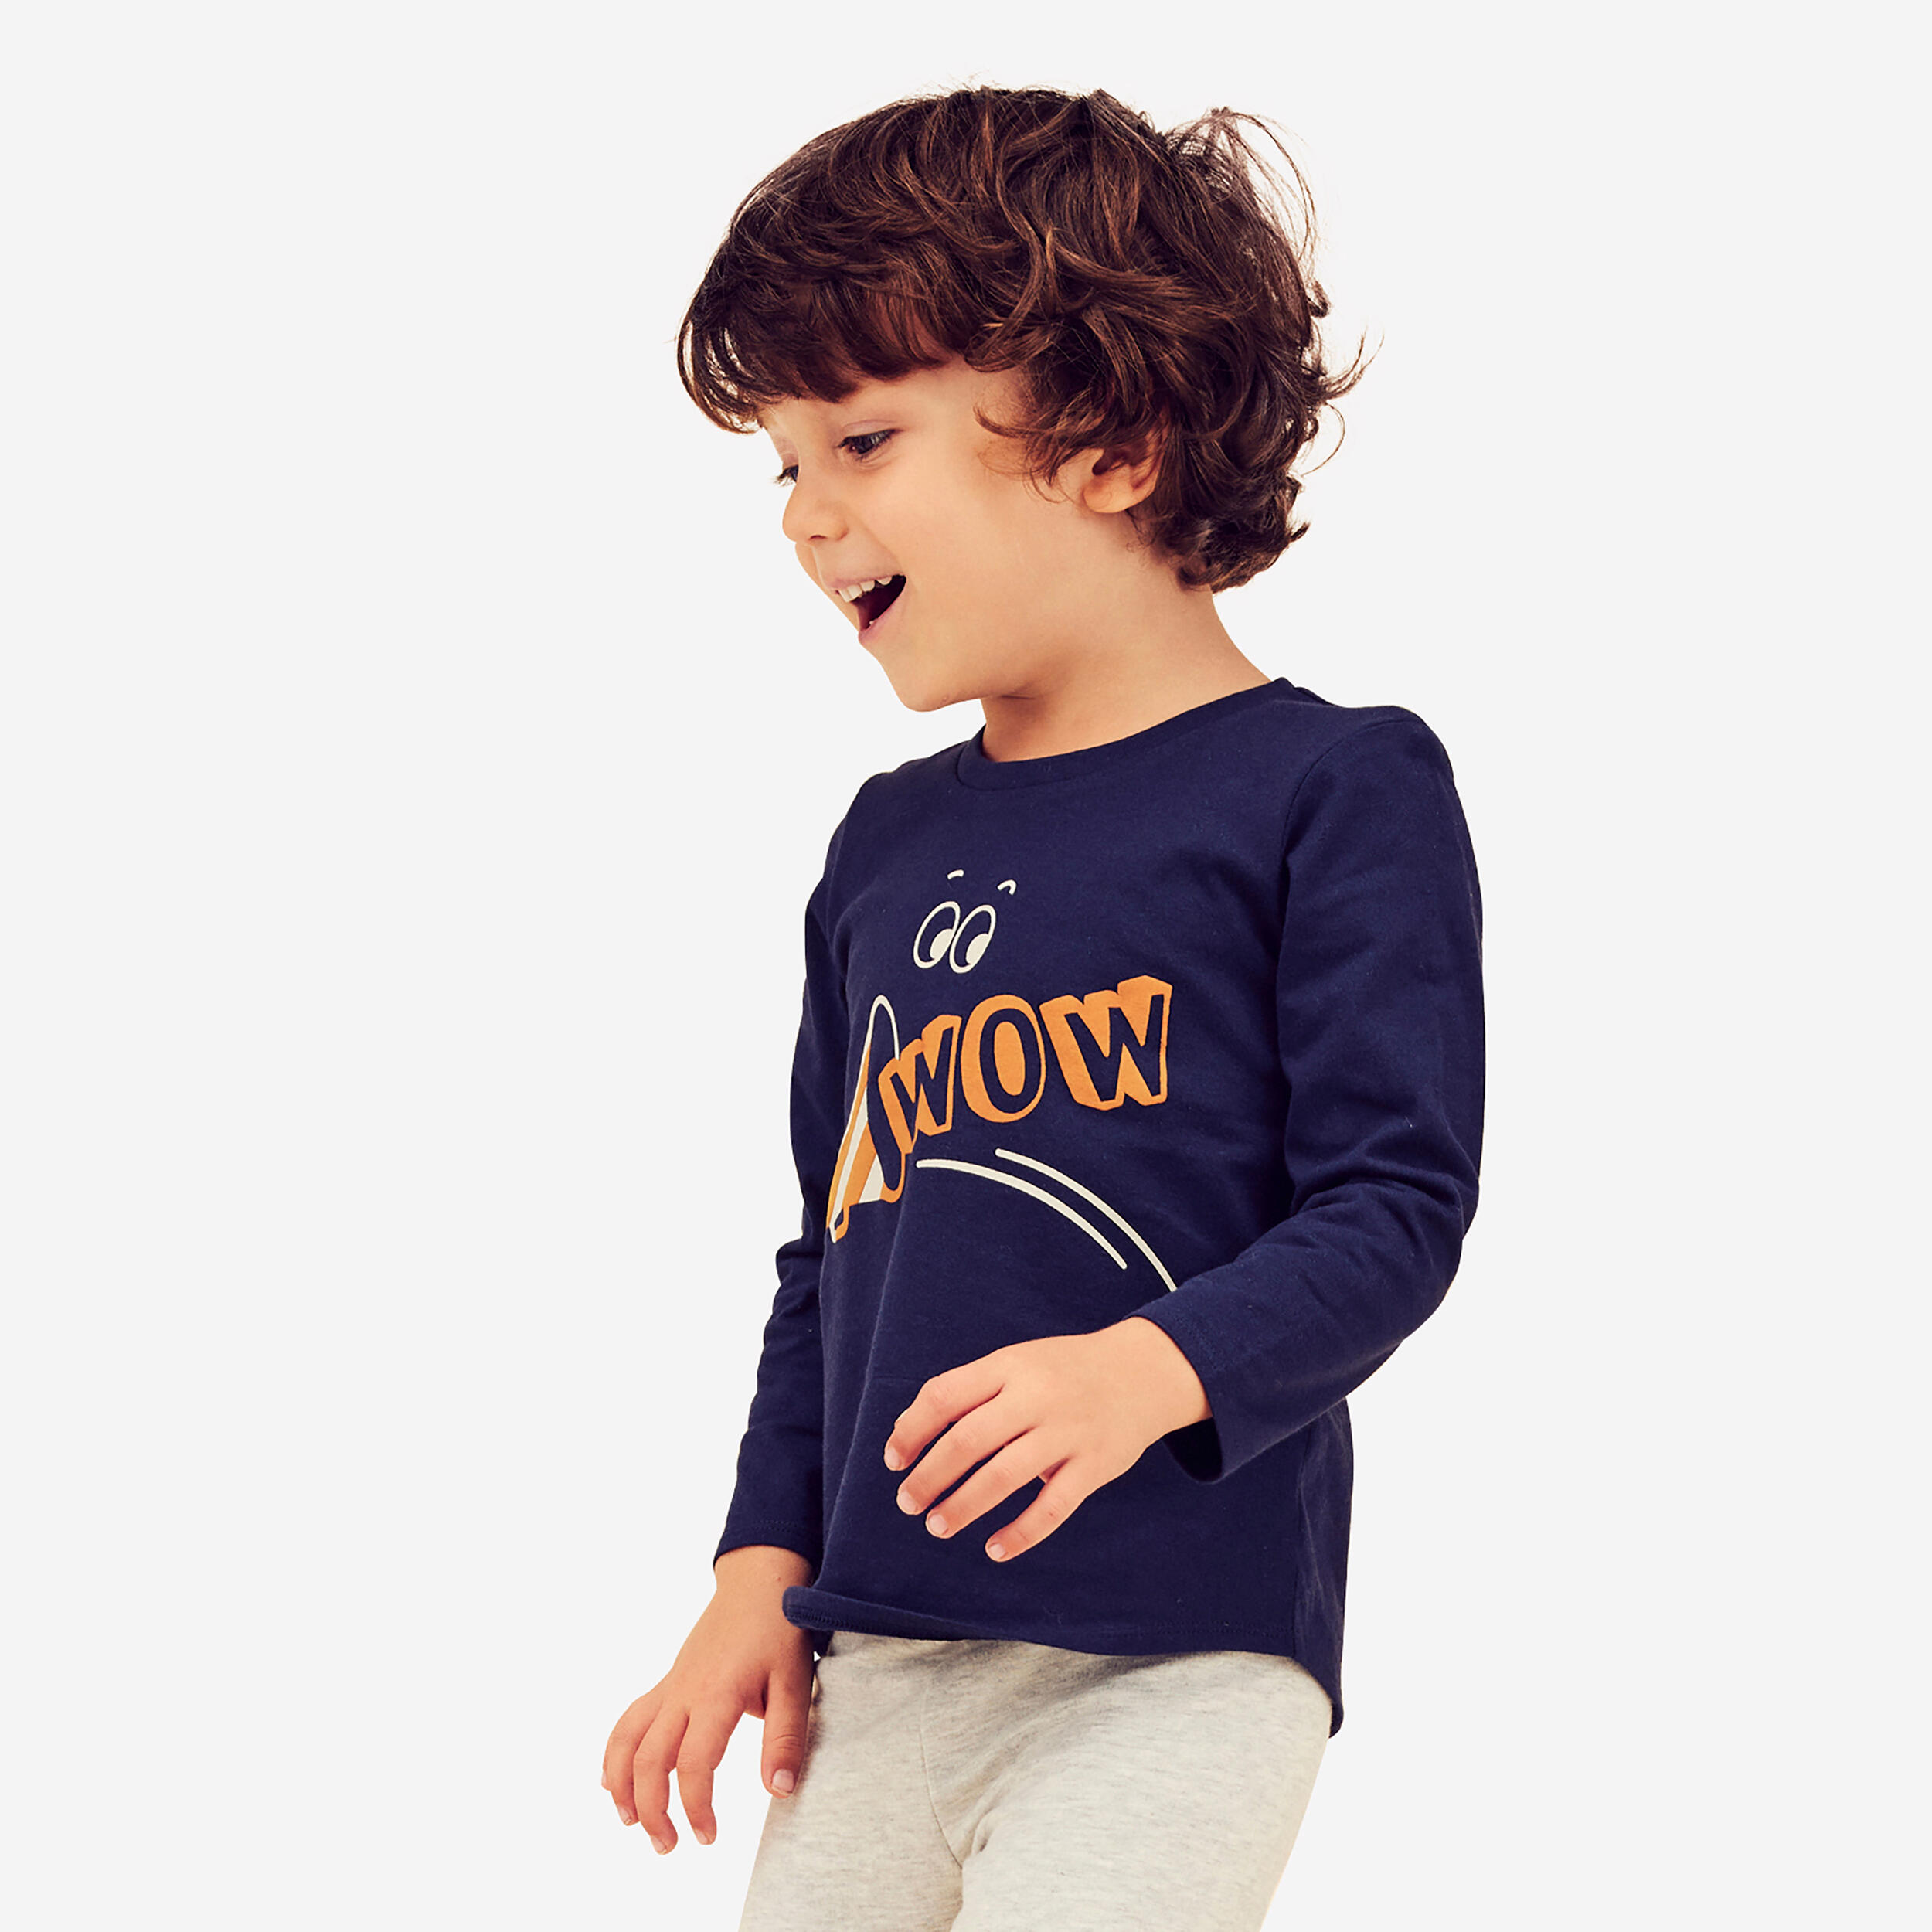 Kids' Long-Sleeved Cotton T-Shirt Basic - Navy Blue with Pattern 5/6